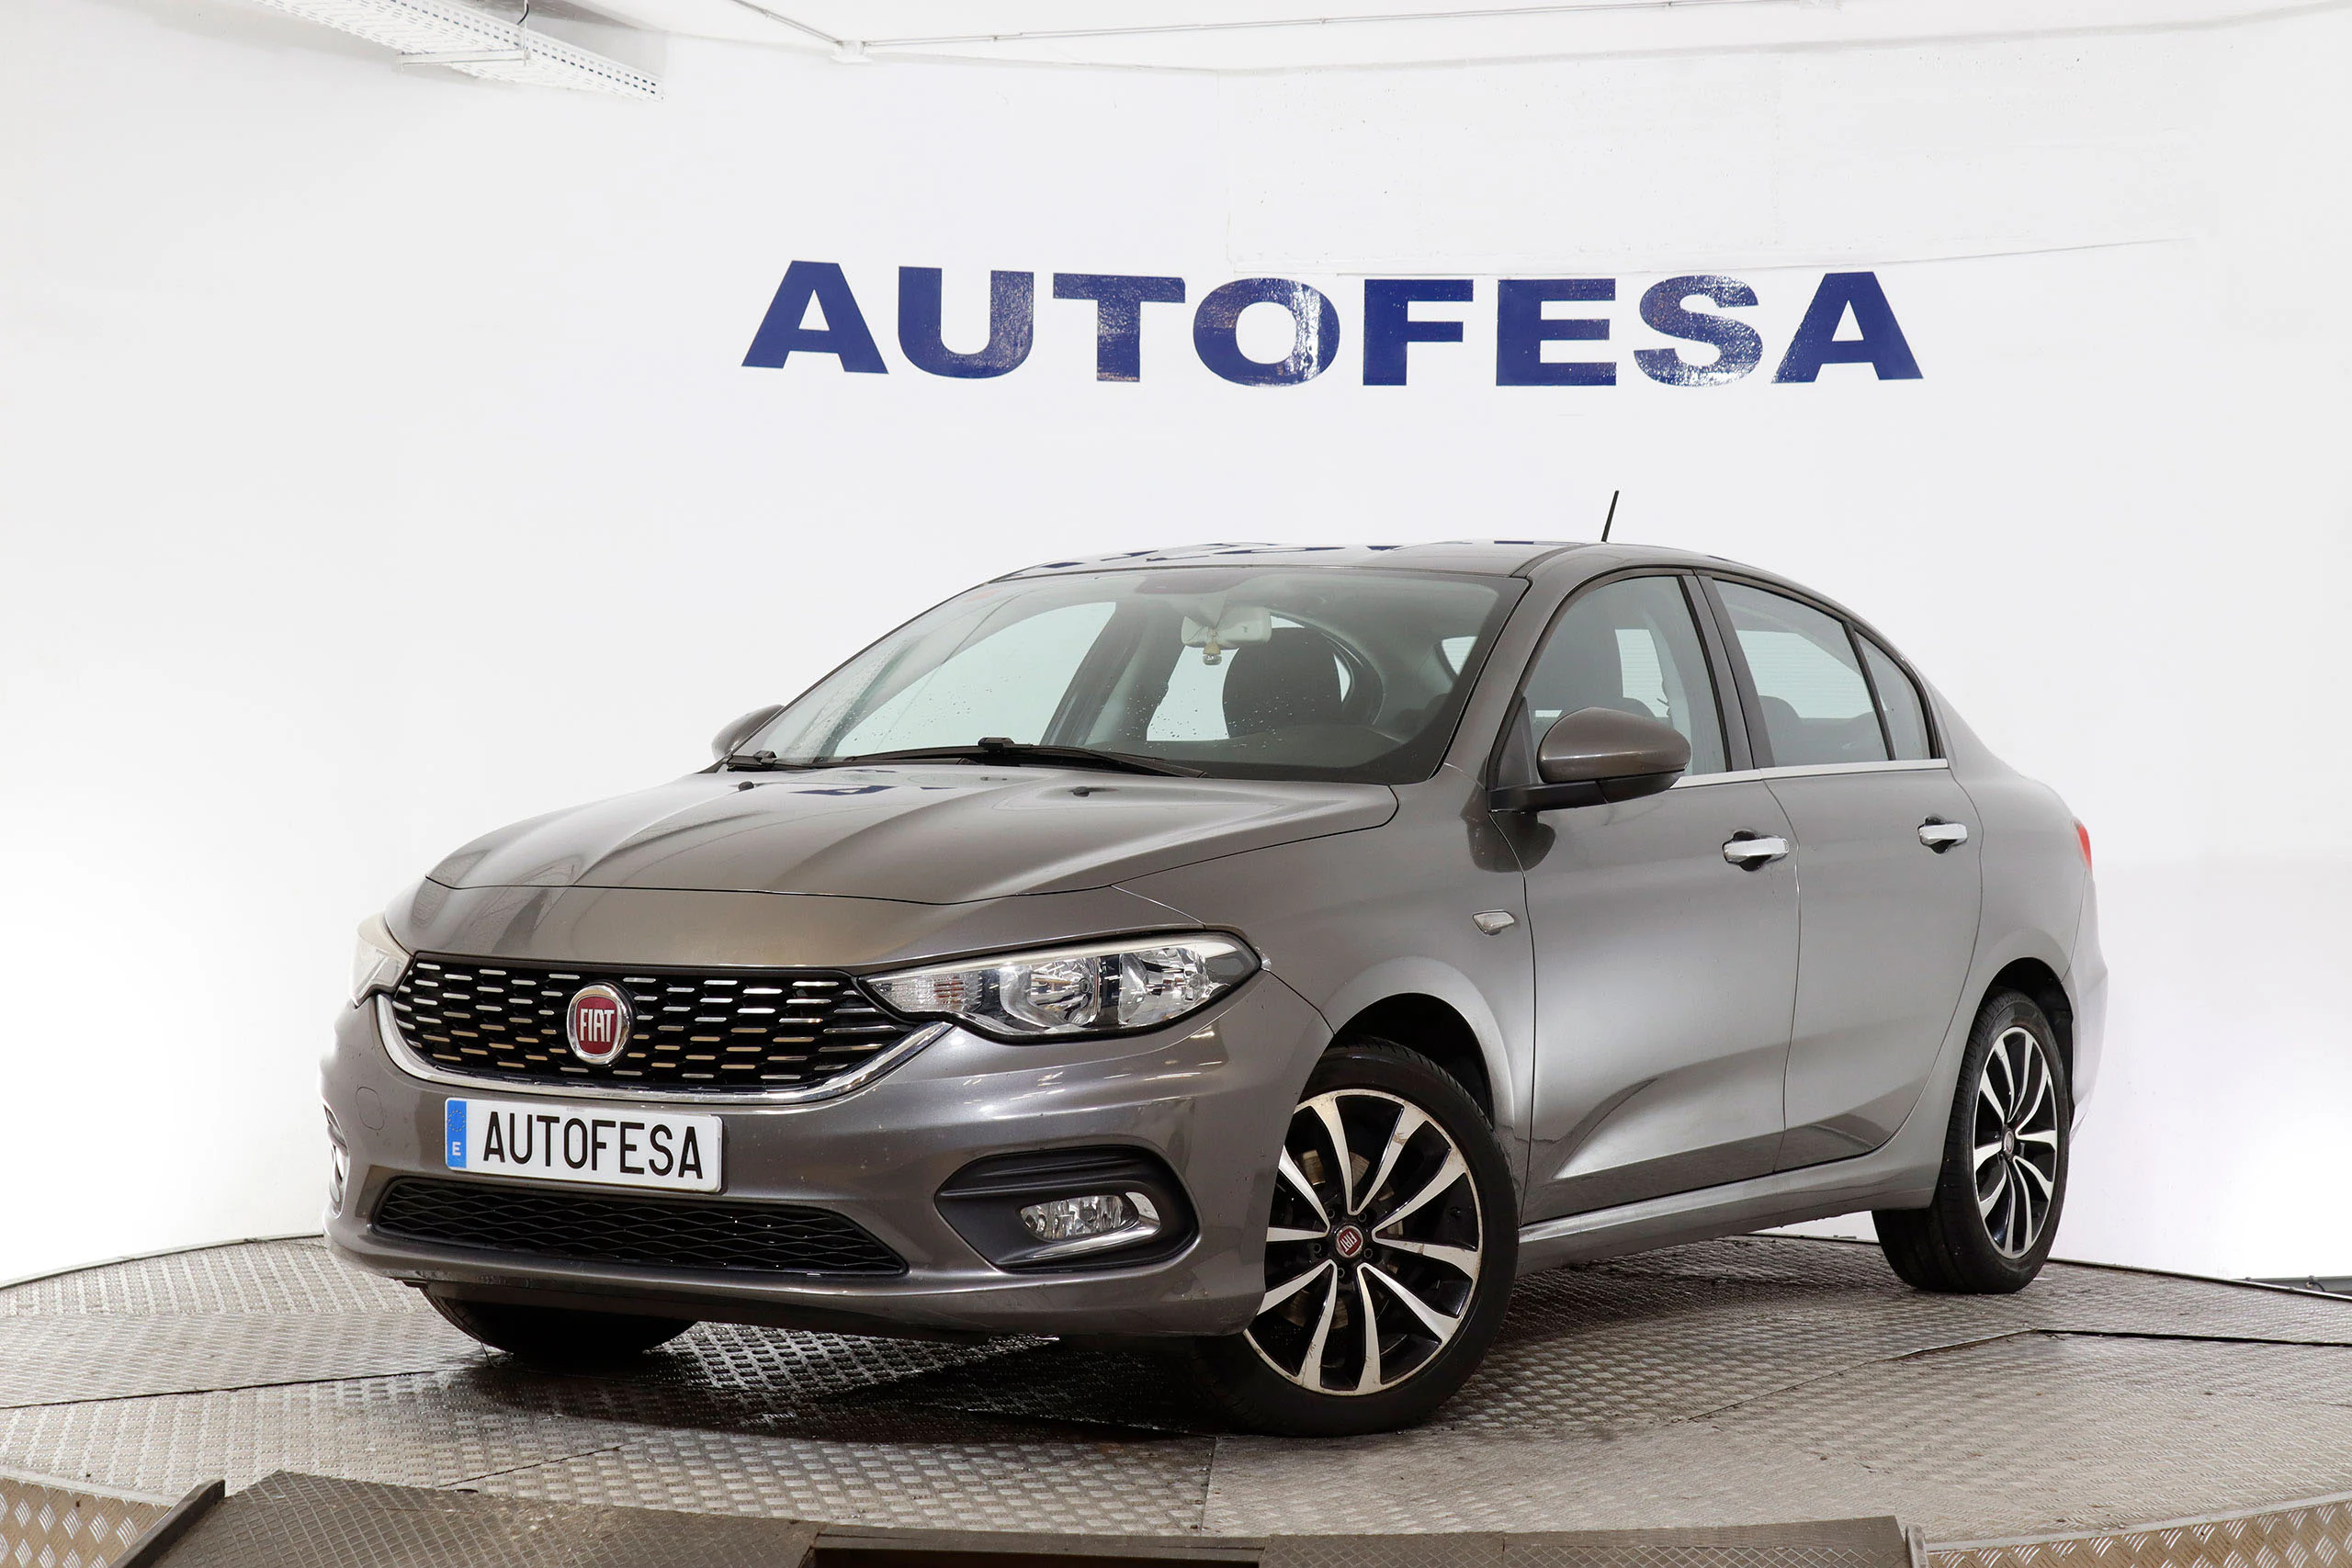 Fiat Tipo 1.6 Opening Edition Plus 120cv 4P # NAVY, PARKTRONIC, BLUETOOTH - Foto 1